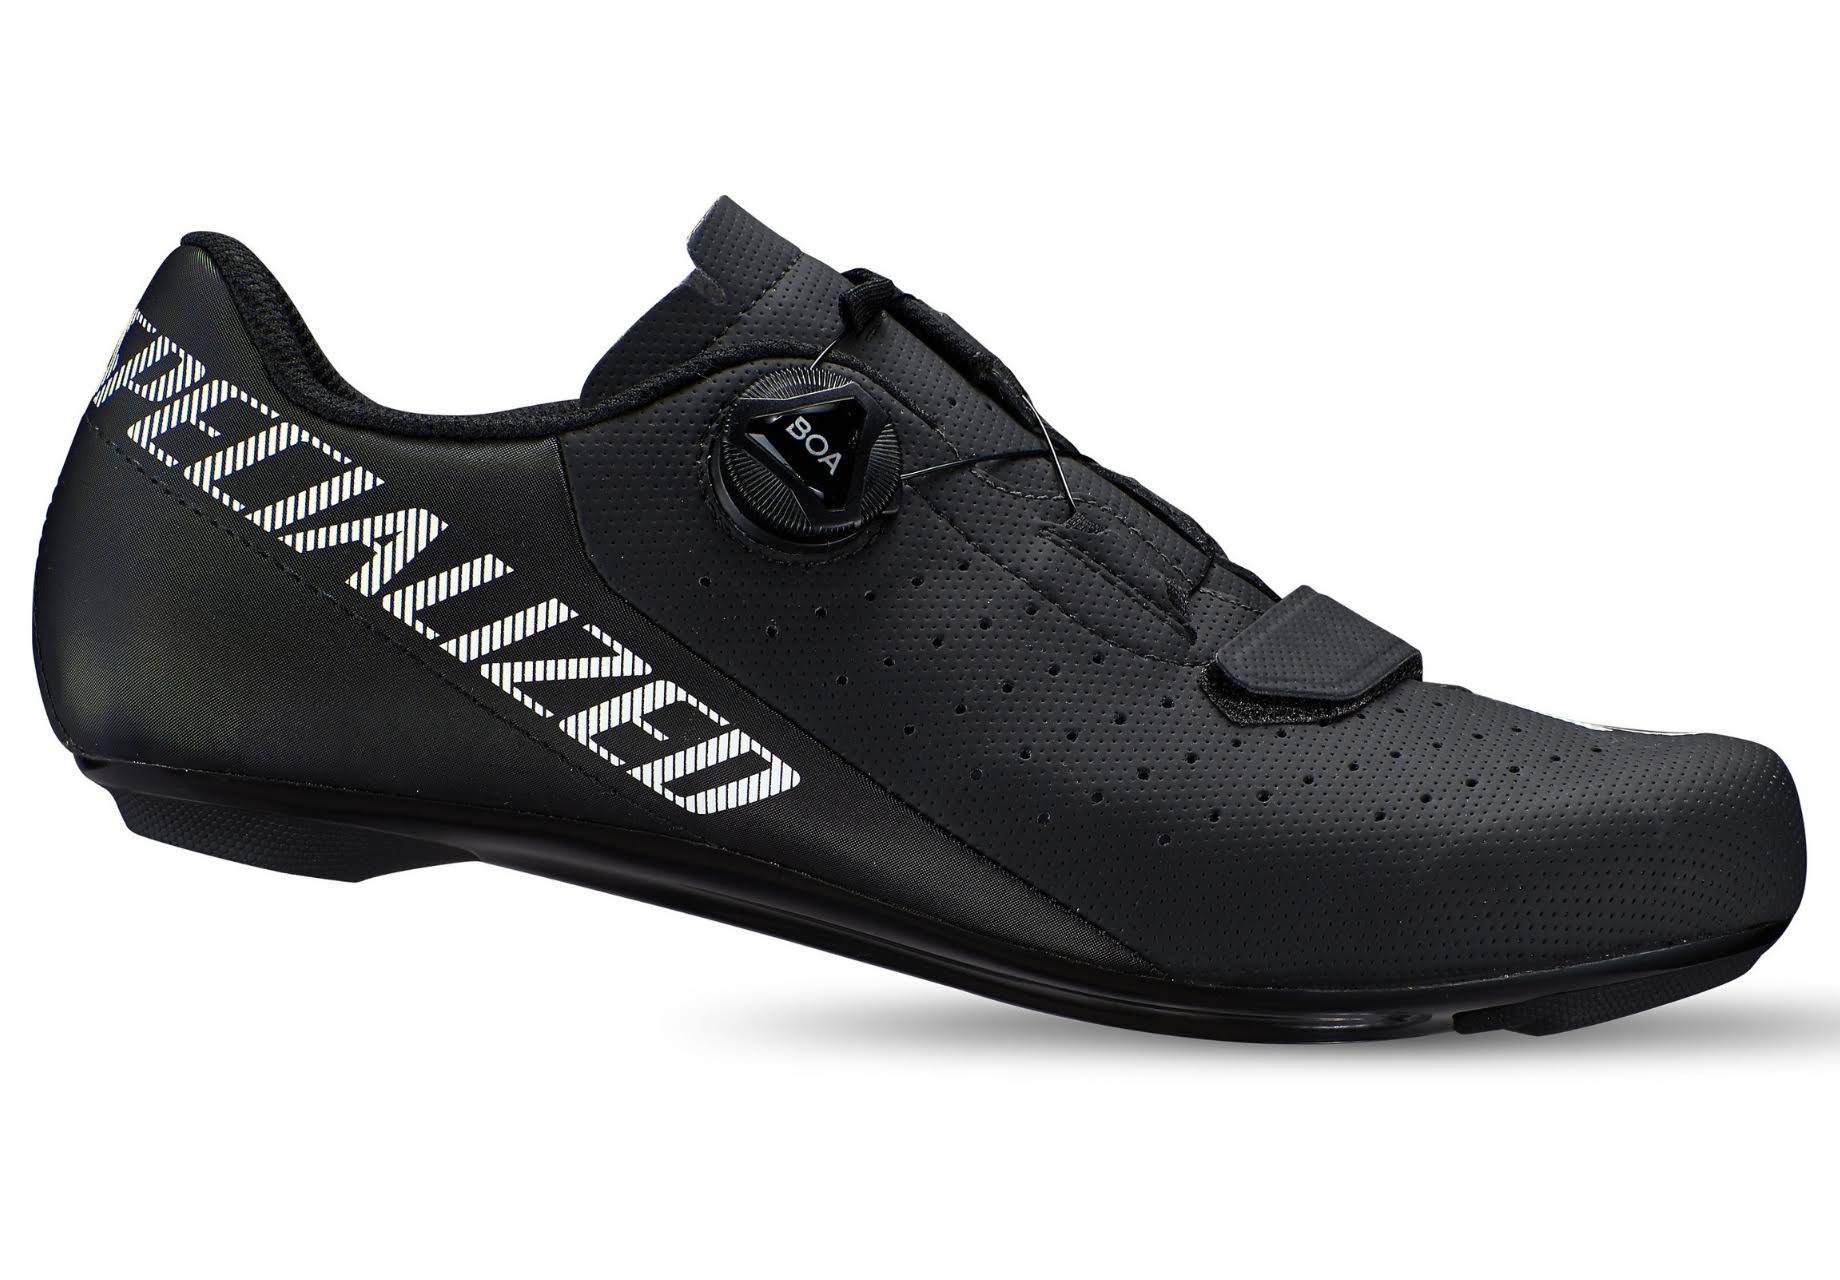 Specialized Torch 1.0 Road Shoes - Black - 46